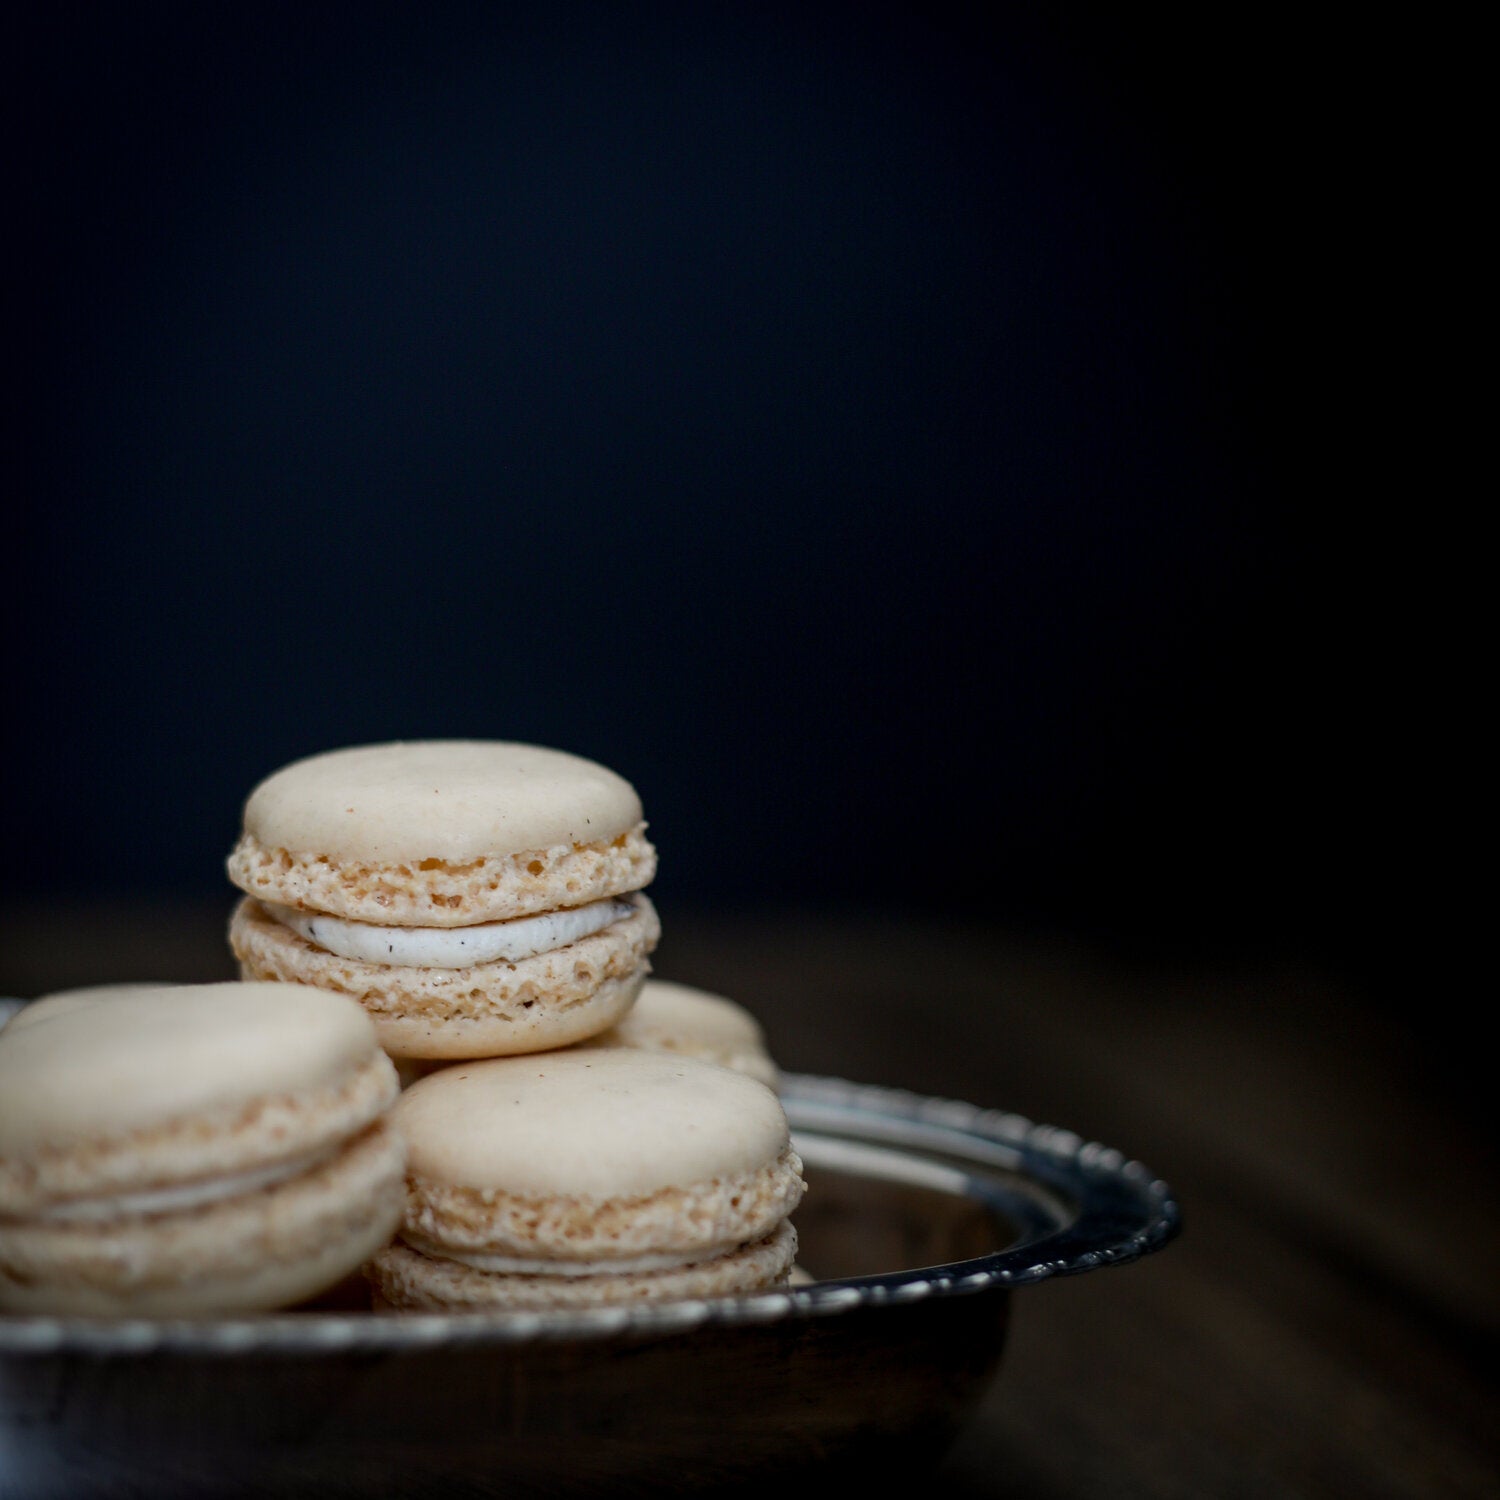 For The Love of Macarons - The Macaron Company